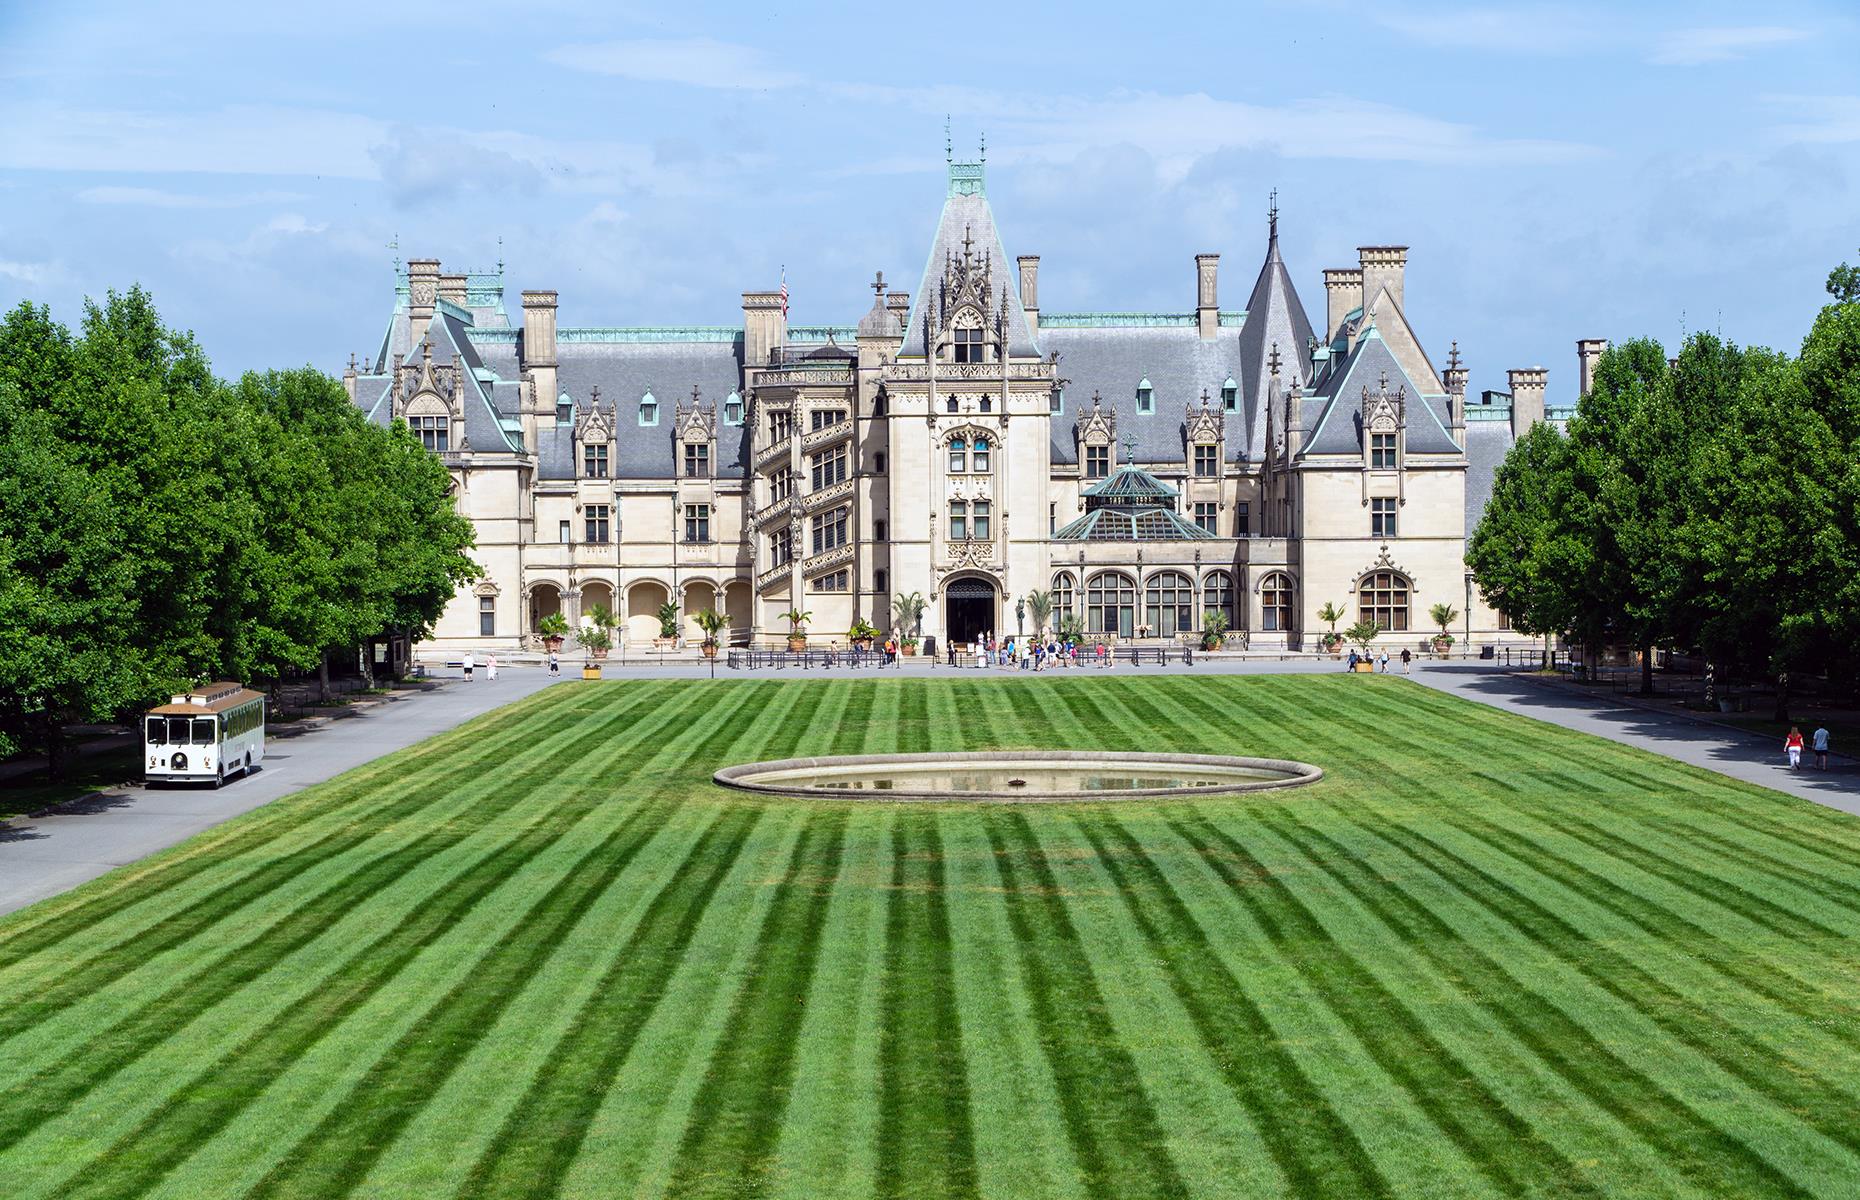 <p>Best known as America's largest home, the sprawling Biltmore Estate is a fine example of a Gilded Age mansion. With 250 lavish rooms, it was built by George Vanderbilt in 1889. An <a href="https://www.biltmore.com/activity/guided-small-group-tour/">exclusive tour</a> invites visitors to see the mansion from the perspective of the Vanderbilts' guests, giving access to exclusive areas. Available with house audio guide tour, two-day access to the gardens and complimentary parking and wine tasting from $305.</p>